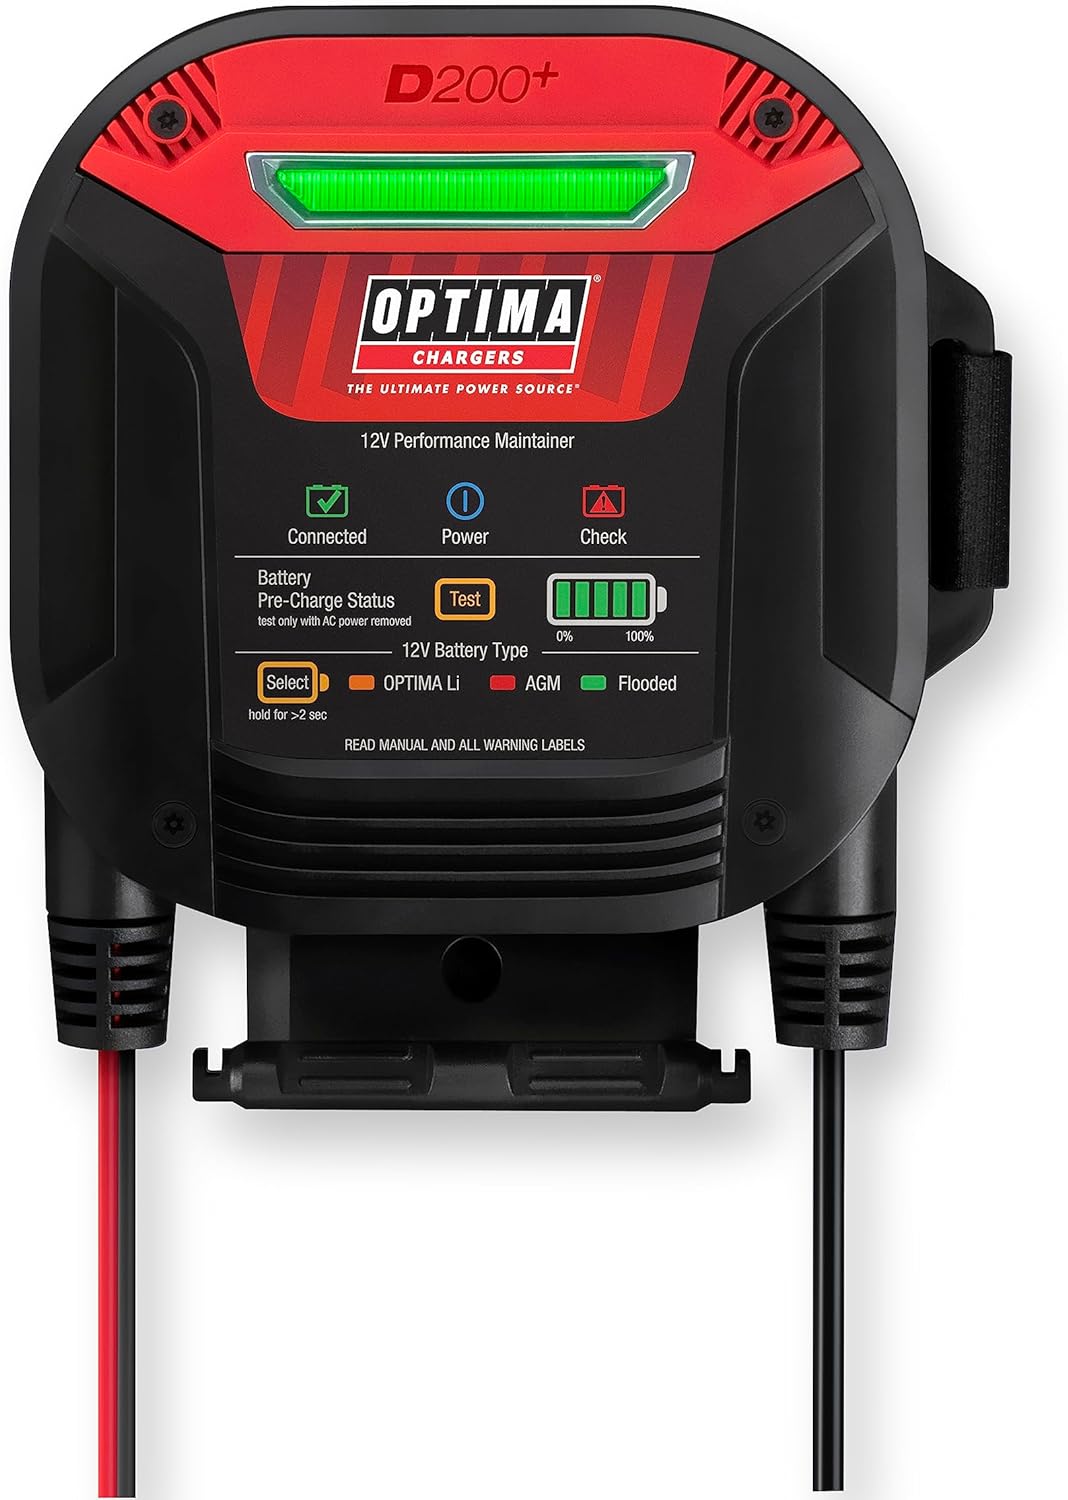 OPTIMA D200+ Battery Maintainer and Lithium Charger for 12 Volt Starting Batteries Including Lithium, AGM, Flooded and Powersports - OPTIMA D200+ Battery Maintainer Review